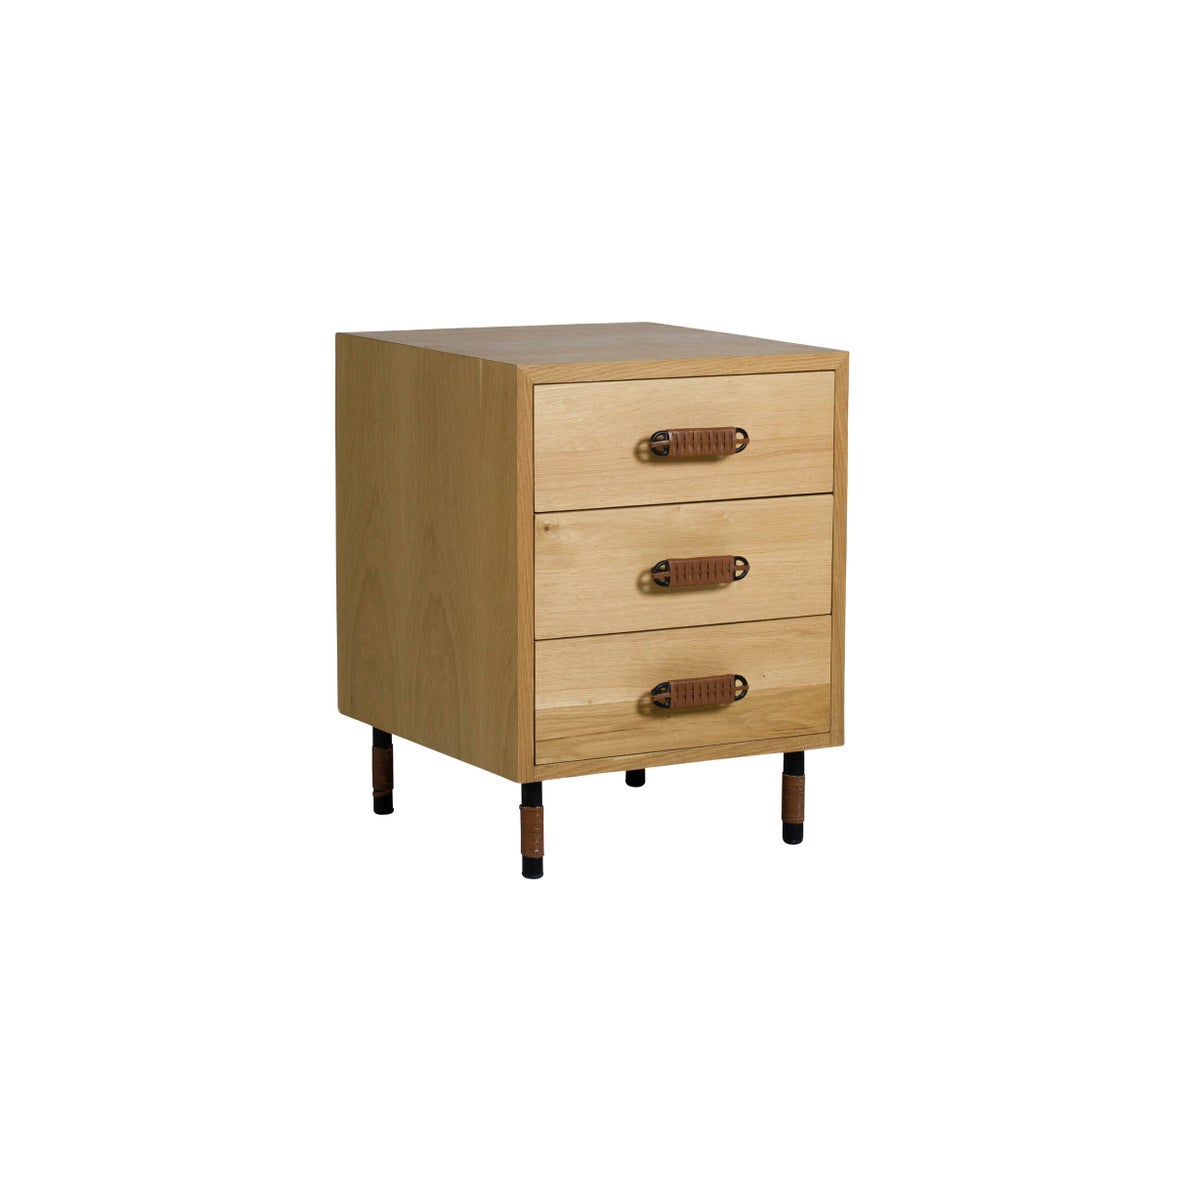 Alameda Side Table in Natural